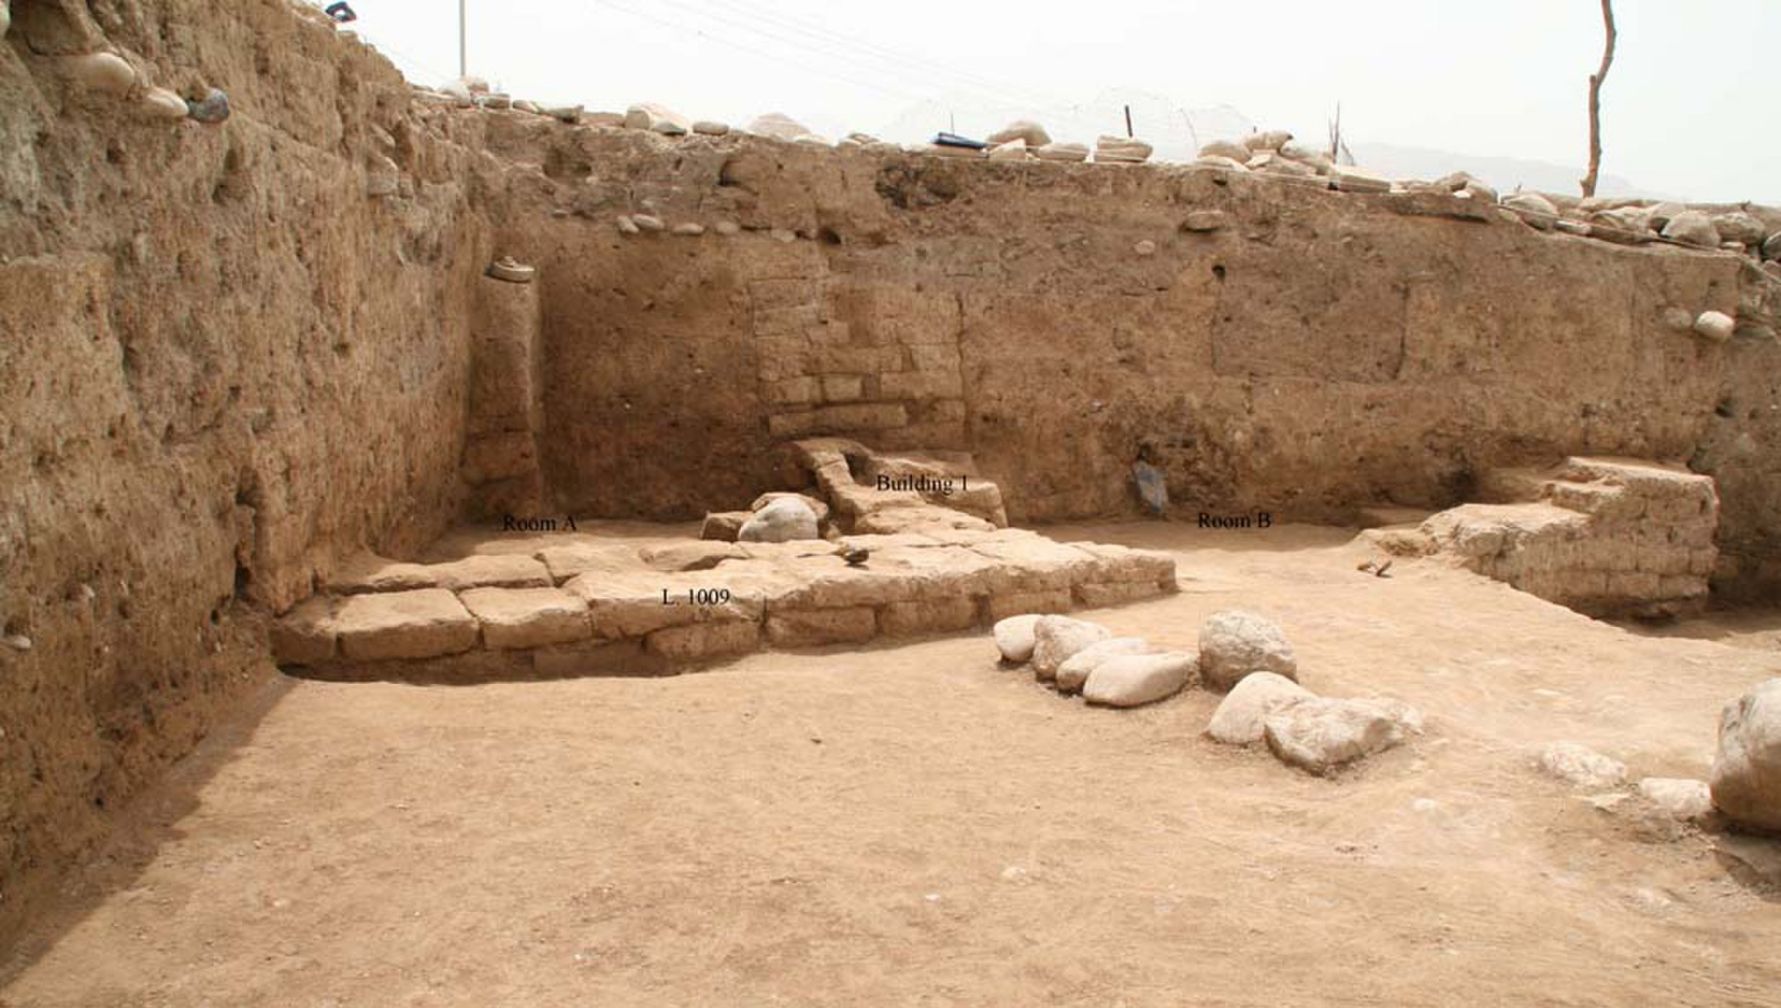 Archaeologists in the Kurdistan region of northern Iraq have discovered an ancient city that was called “Idu.” The site was occupied as far back as the Neolithic period, when farming first appeared in the Middle East, and the city reached its greatest extent between 3,300 and 2,900 years ago. The building shown here is a domestic structure, with at least two rooms, that may date to relatively late in the city’s life, perhaps around 2,000 years ago when the Parthian Empire controlled the area.